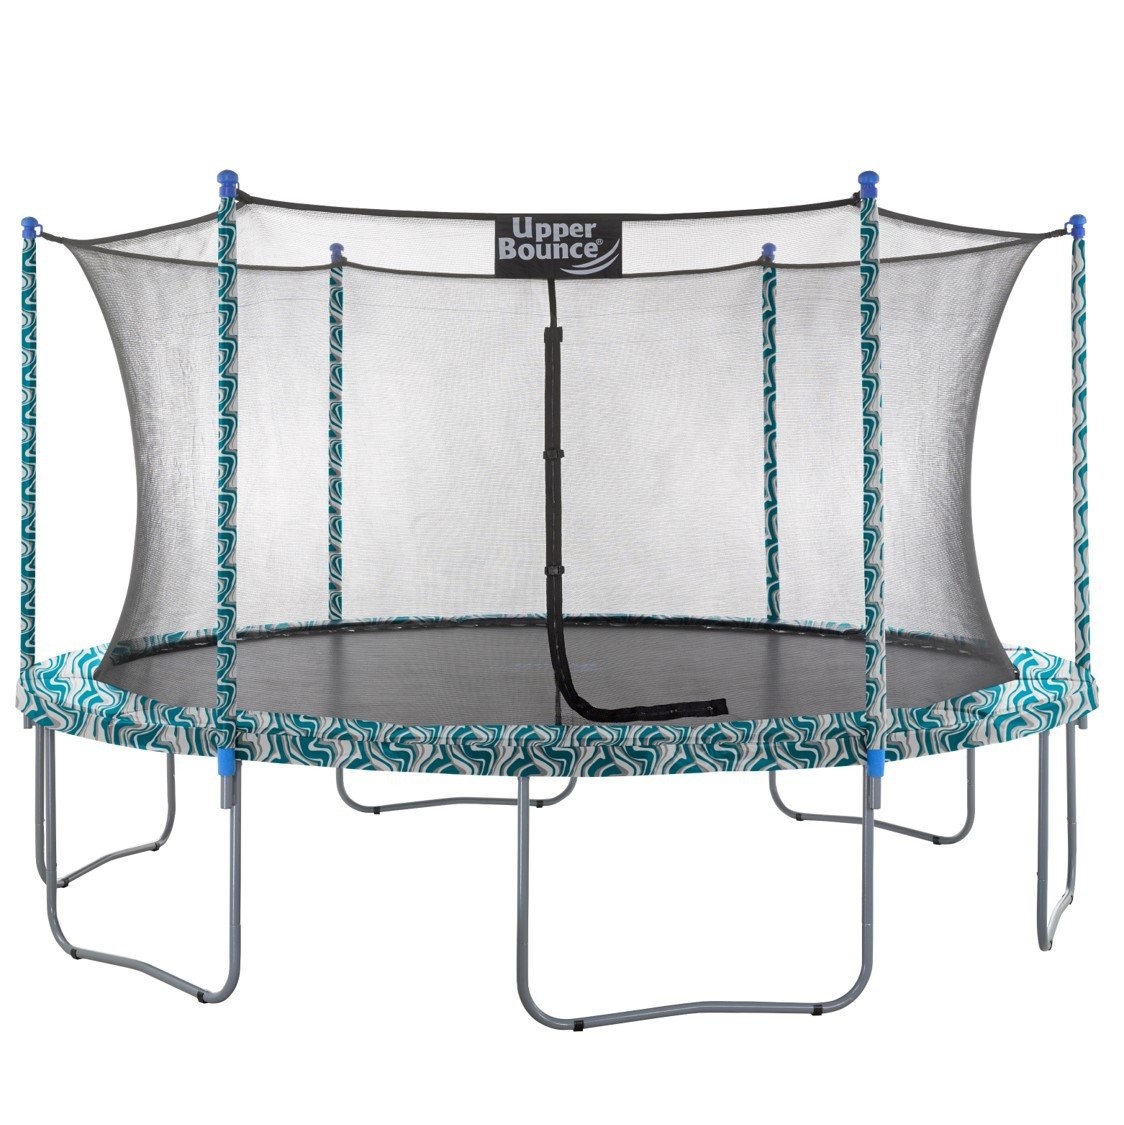 15Ft Large Trampoline and Enclosure Set | Garden & Outdoor Trampoline with Safety Net, Mat, Pad | Maui Marble